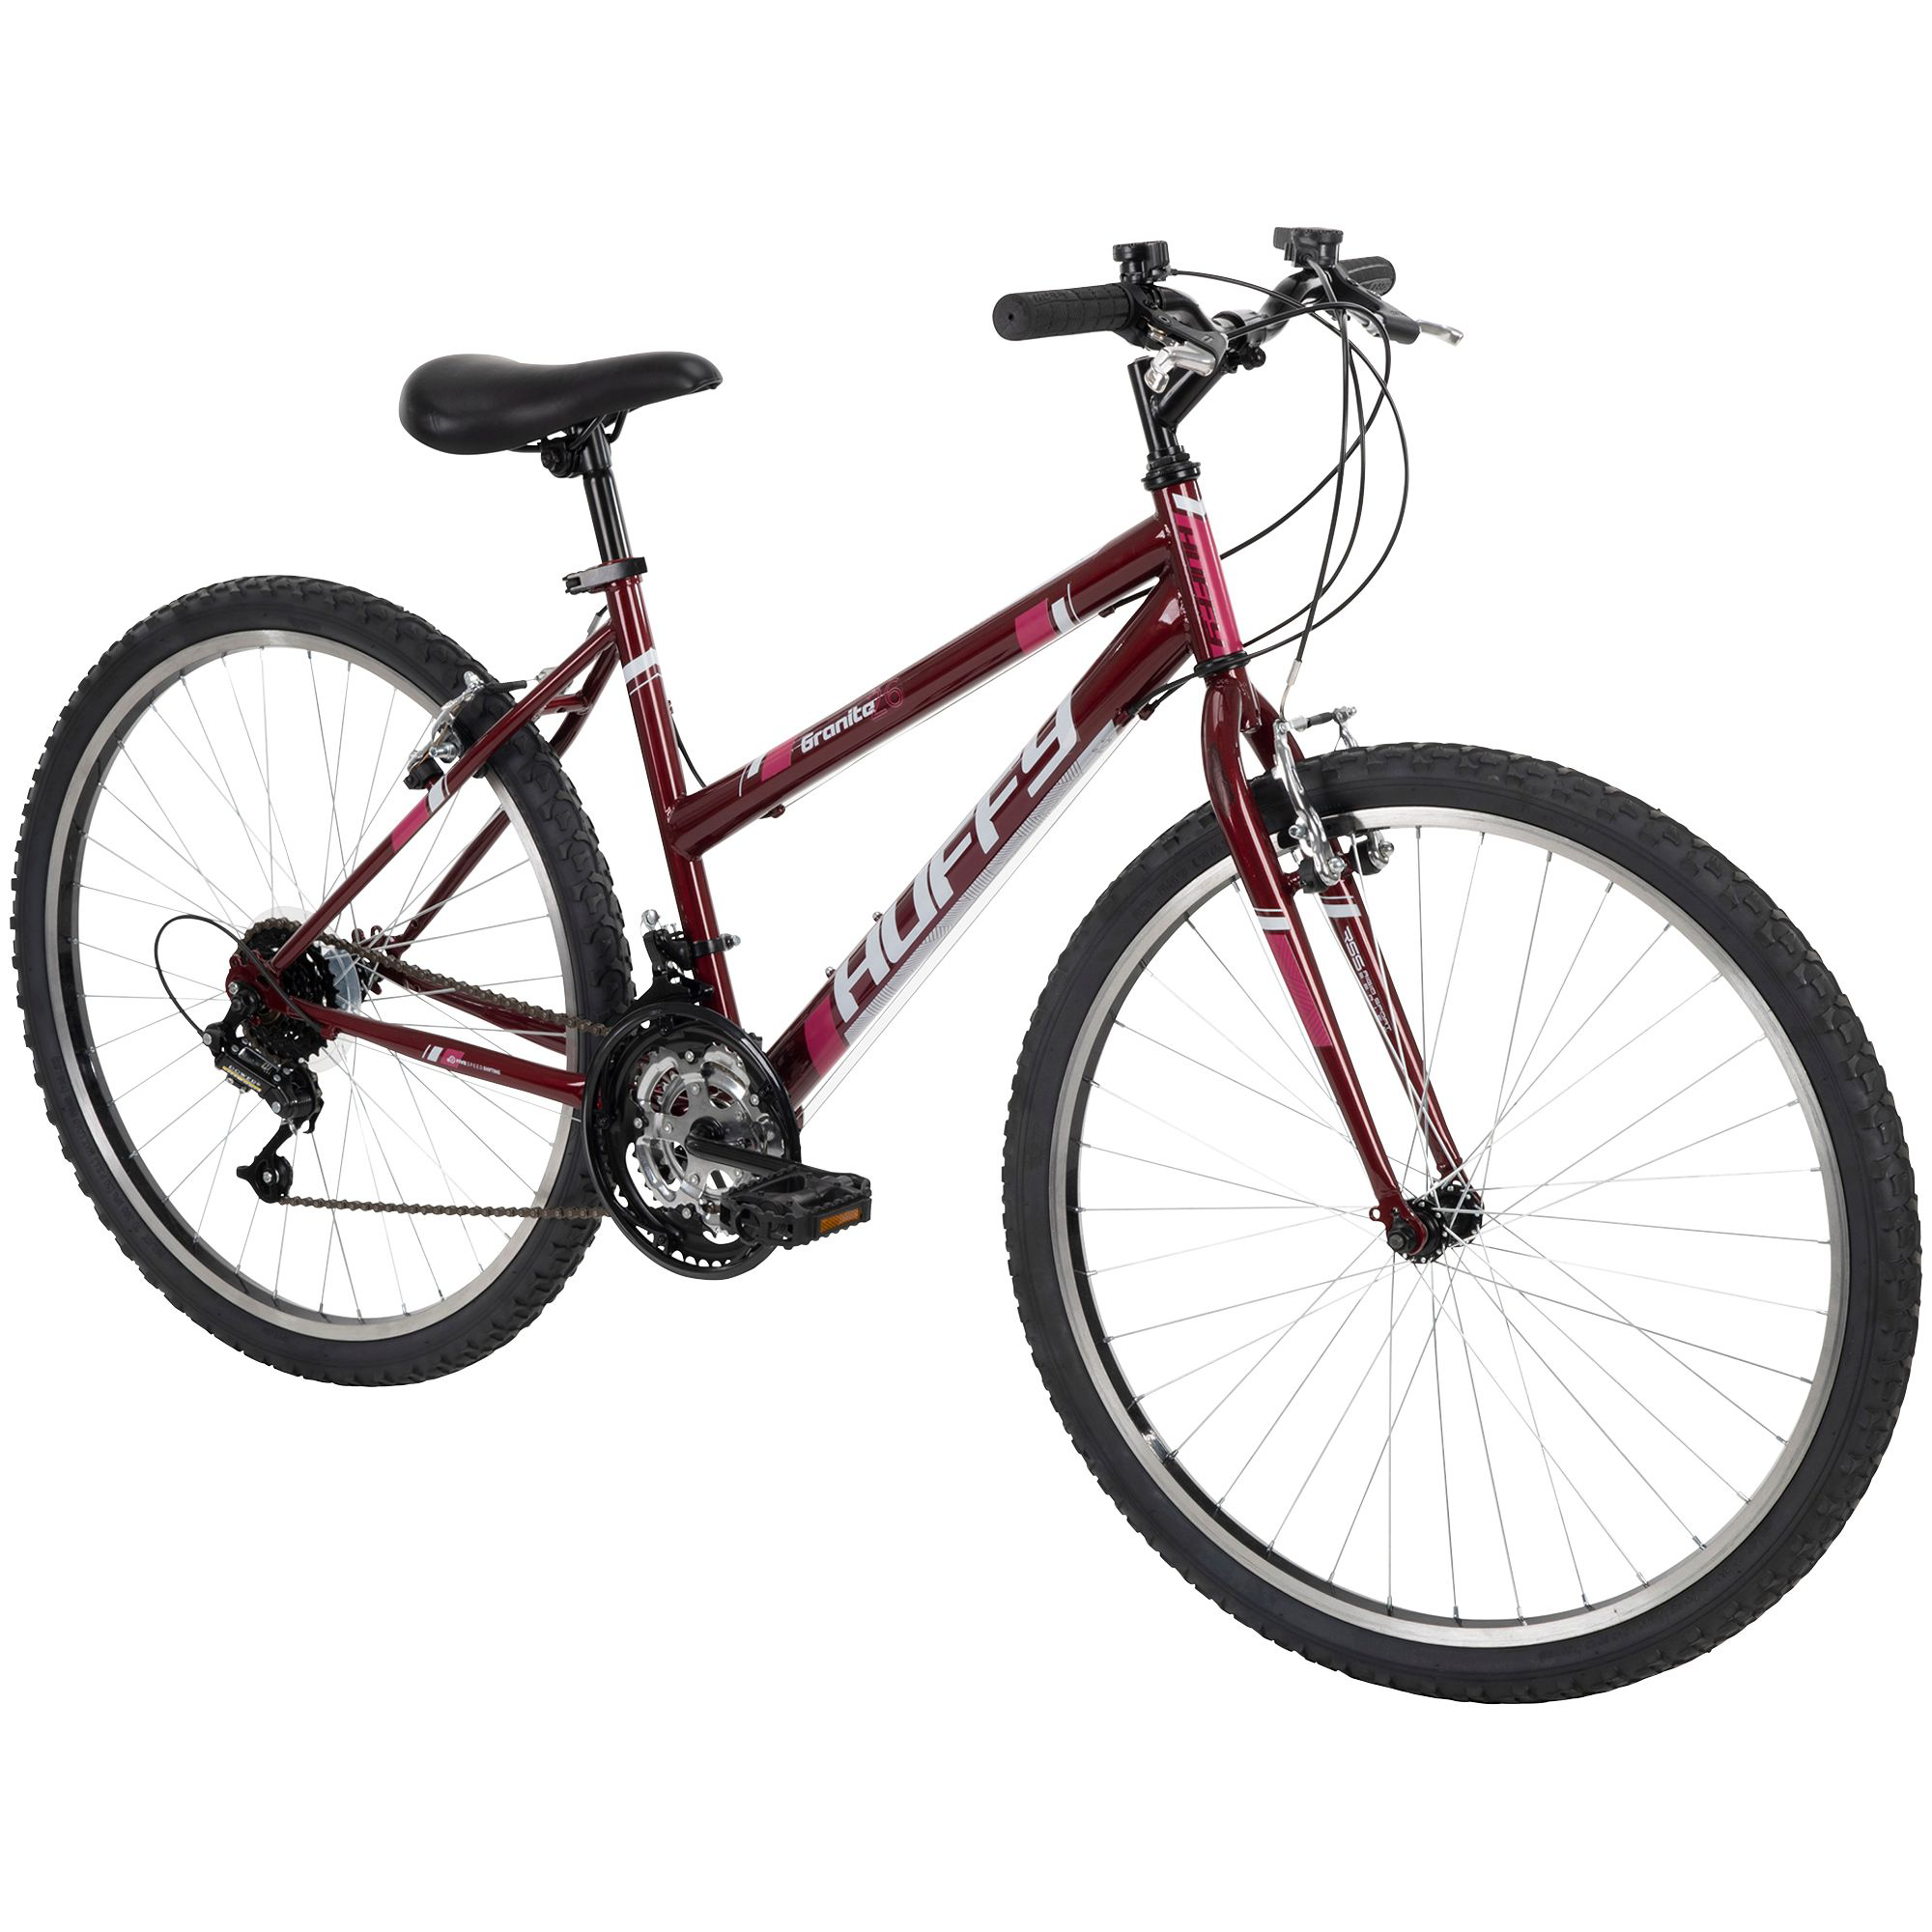 Huffy 15-Speed Granite Mountain Bike with Step-Through Frame - Red - Adult